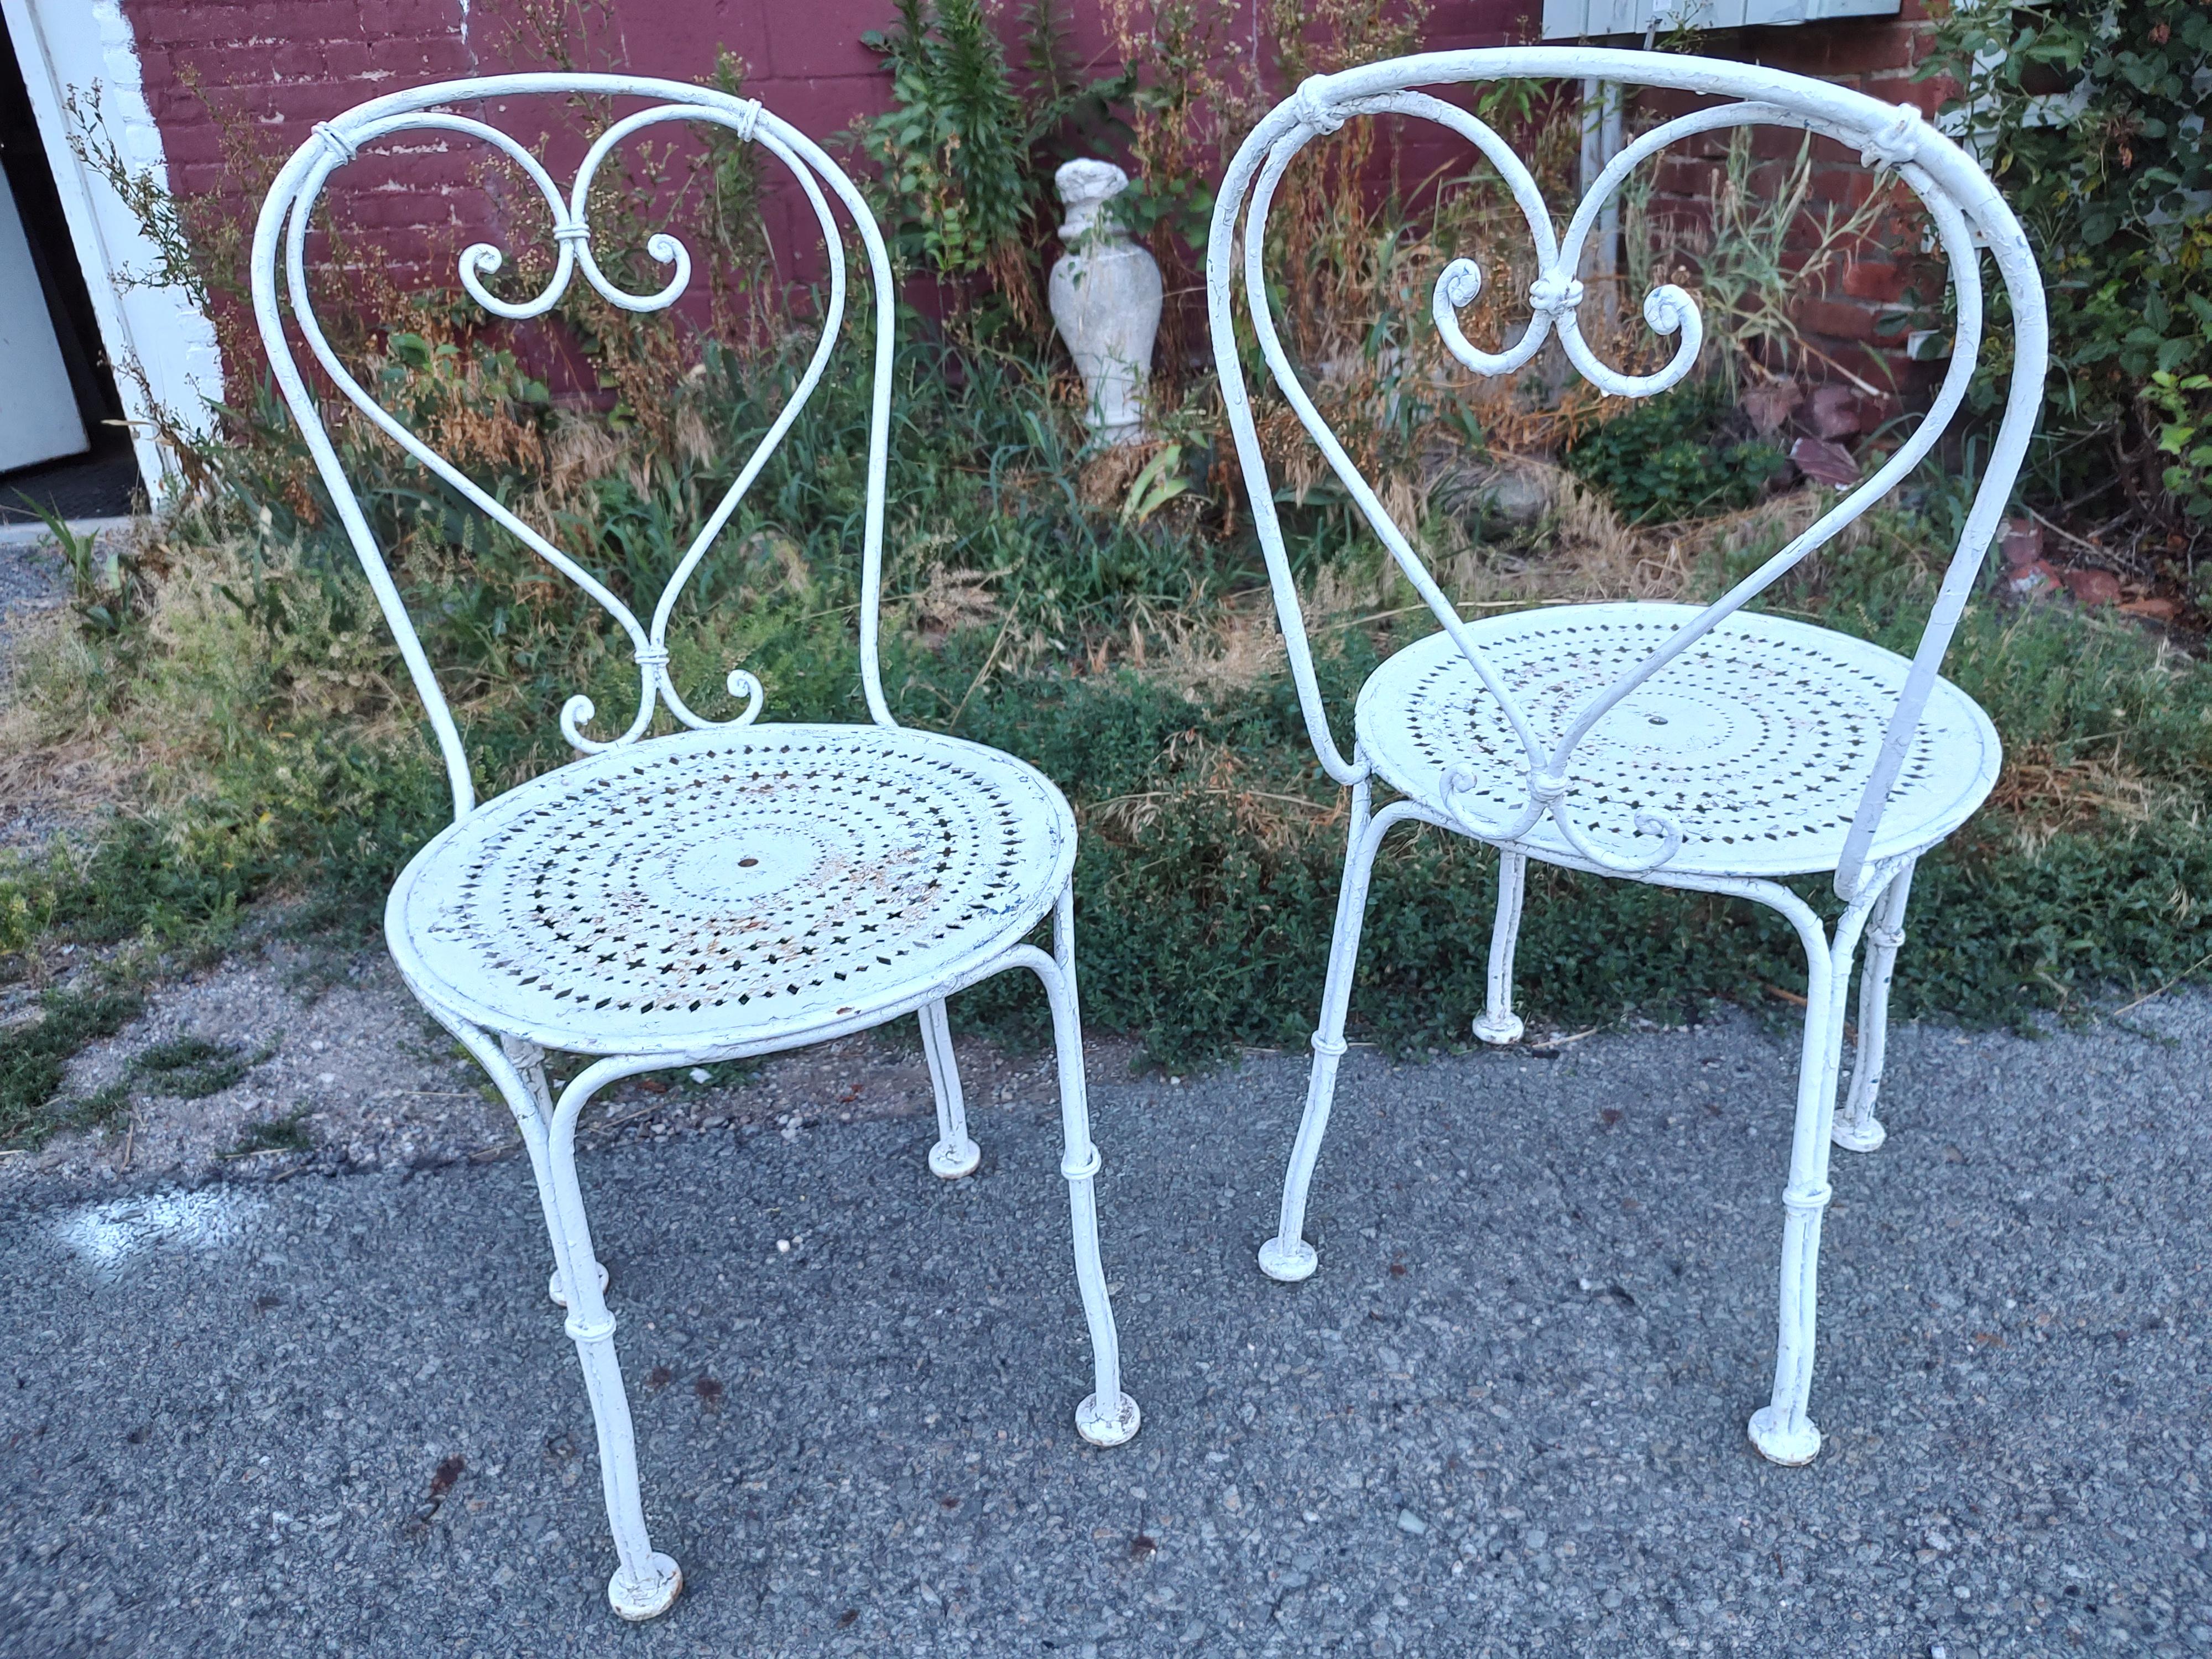 Fabulous pair of Mid Century French Iron chairs with pierced seats. Heart shaped backs side chairs with lots of character and patina. Priced and sold as a pair. Can be parcel posted. In excellent and sound antique condition, some peeling paint,